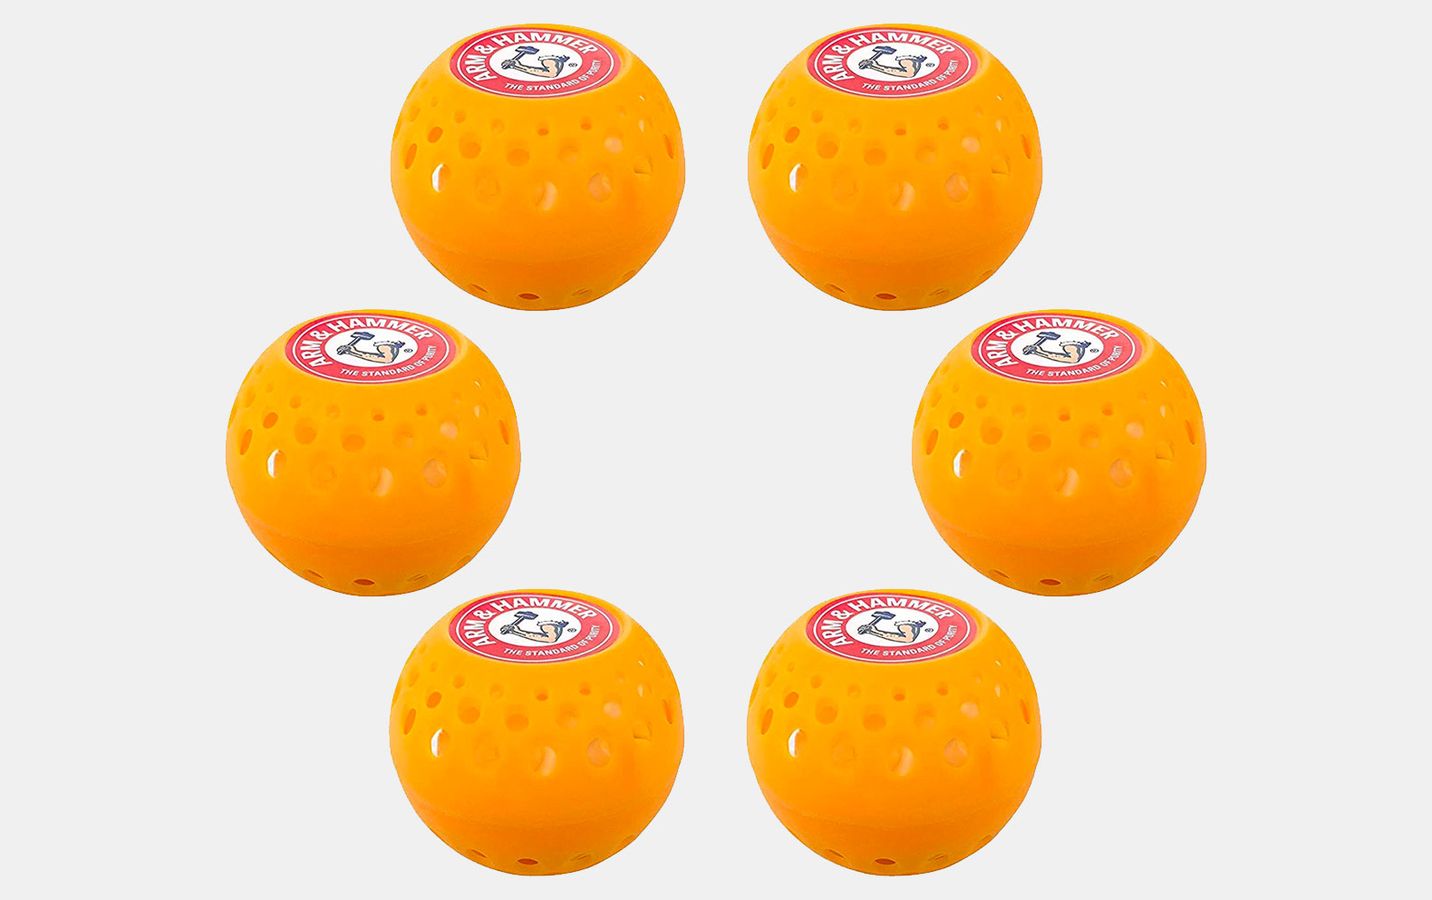 Arm & Hammer Odor Busterz product image of six orange odor eliminating ball inserts.